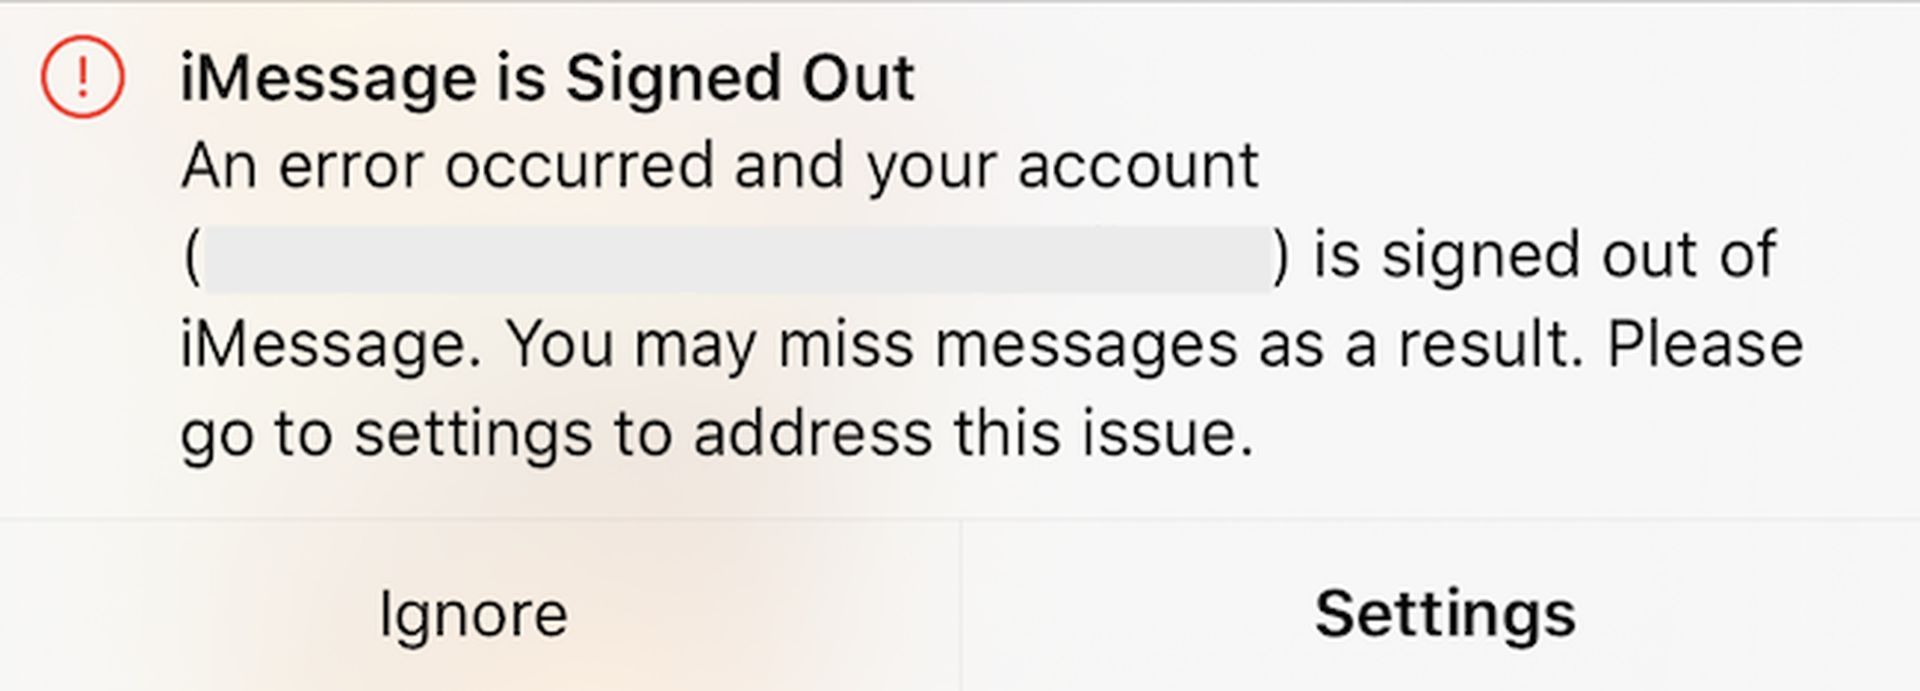 iMessage Signed Out error